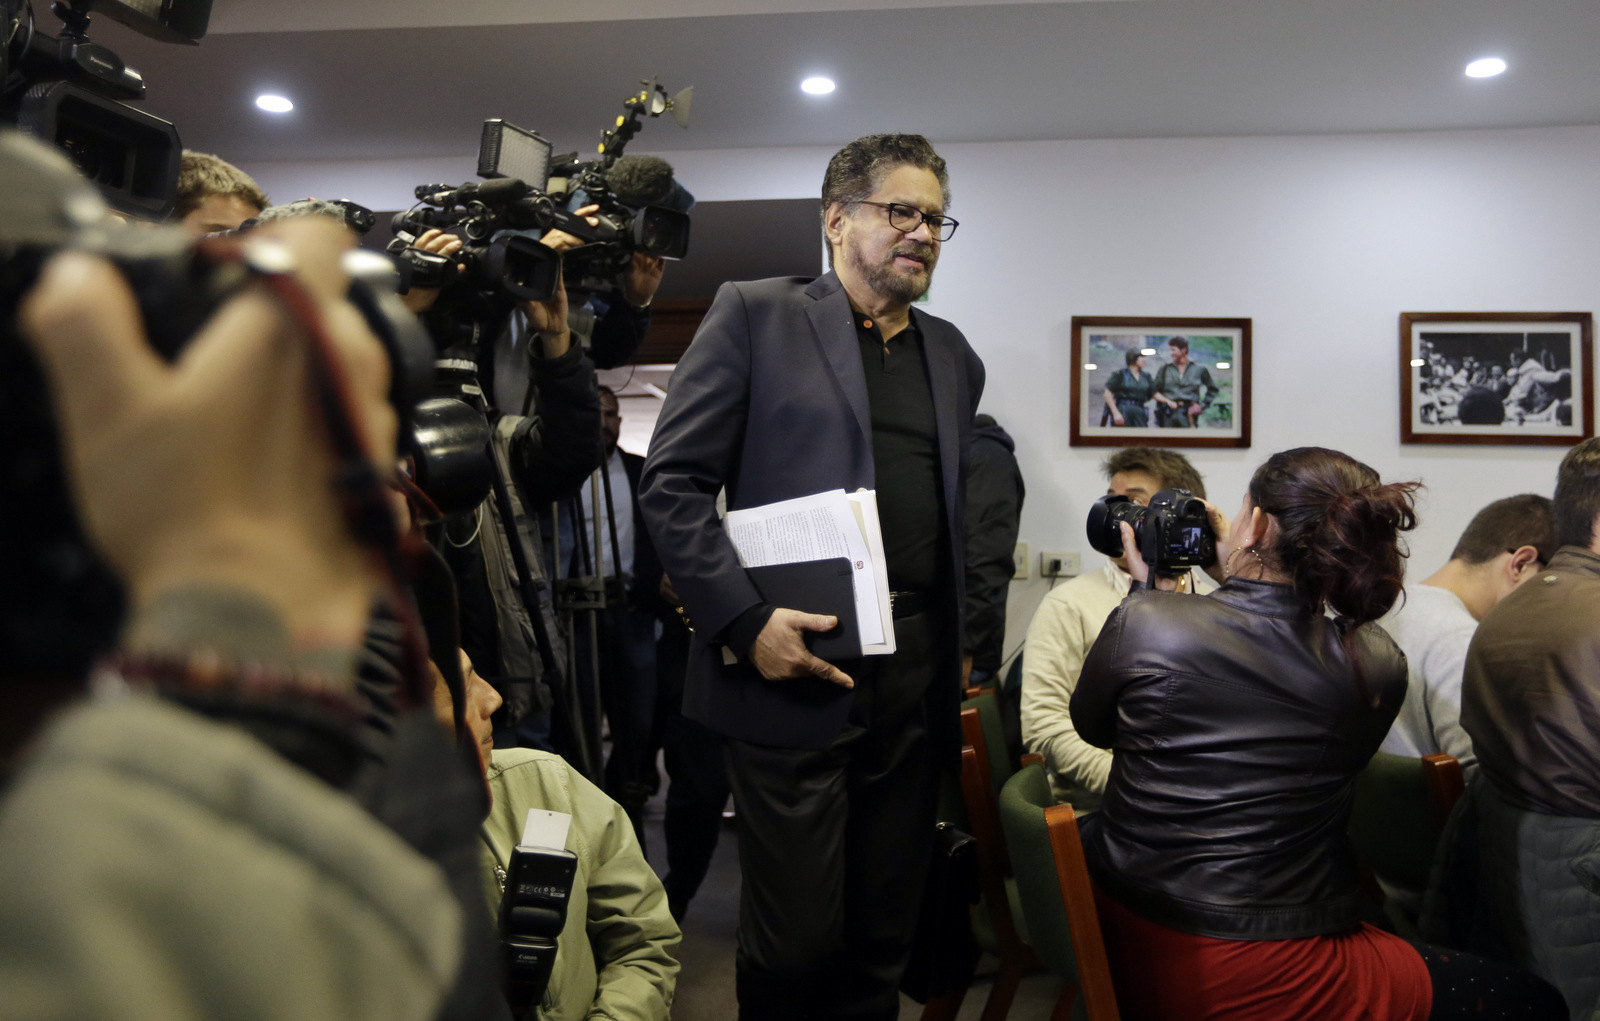 Ivan Marquez, a former leader of the Revolutionary Armed Forces of Colombia, FARC, arrives for a press conference following the arrest of Jesus Santrich in Bogota, Colombia, April 10, 2018. (AP/Fernando Vergara)